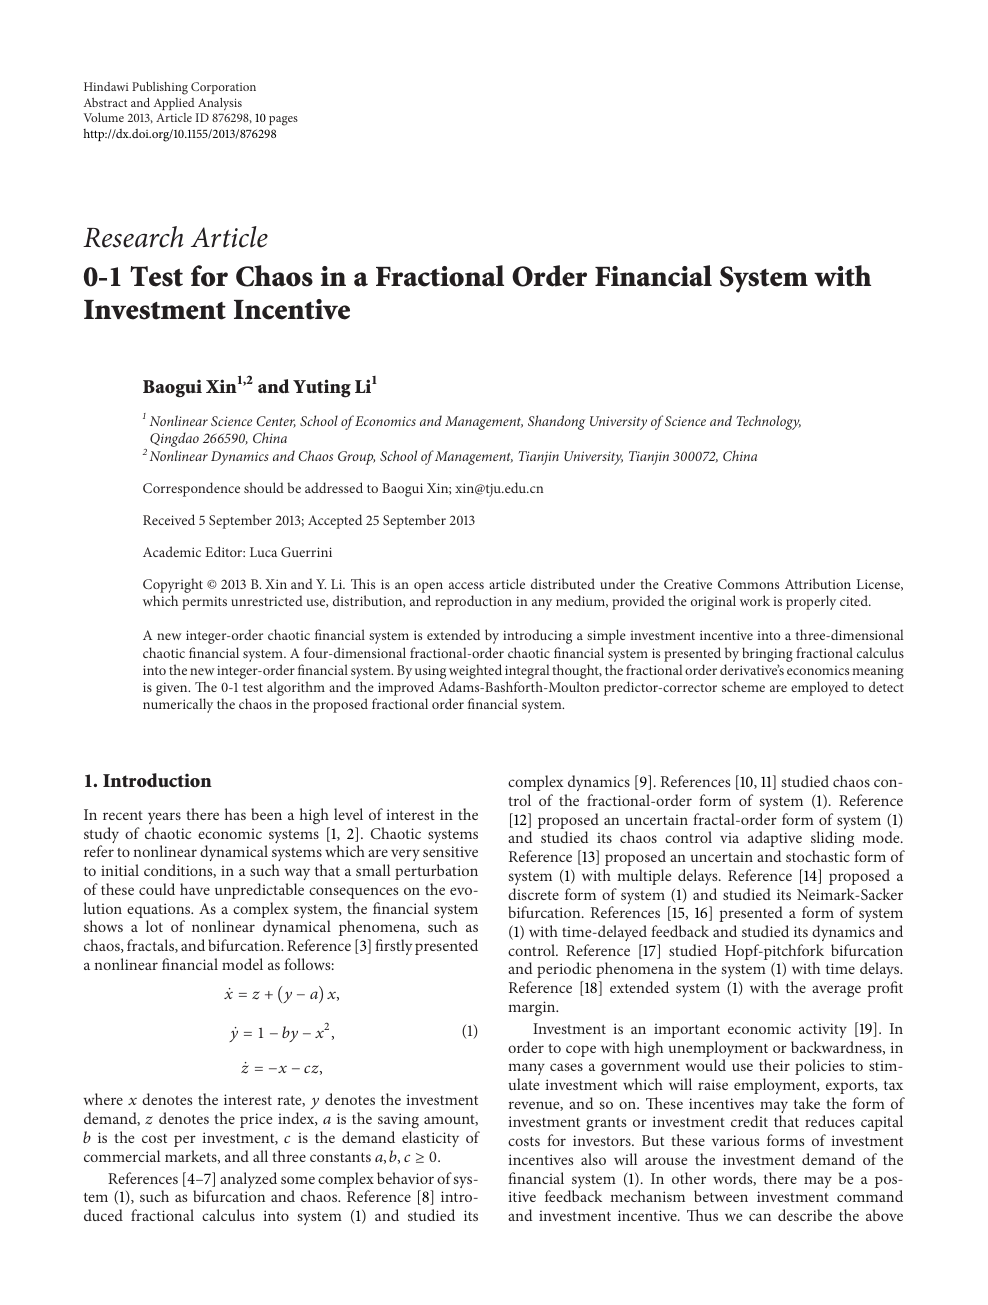 0 1 Test For Chaos In A Fractional Order Financial System With Investment Incentive Topic Of Research Paper In Mathematics Download Scholarly Article Pdf And Read For Free On Cyberleninka Open Science Hub